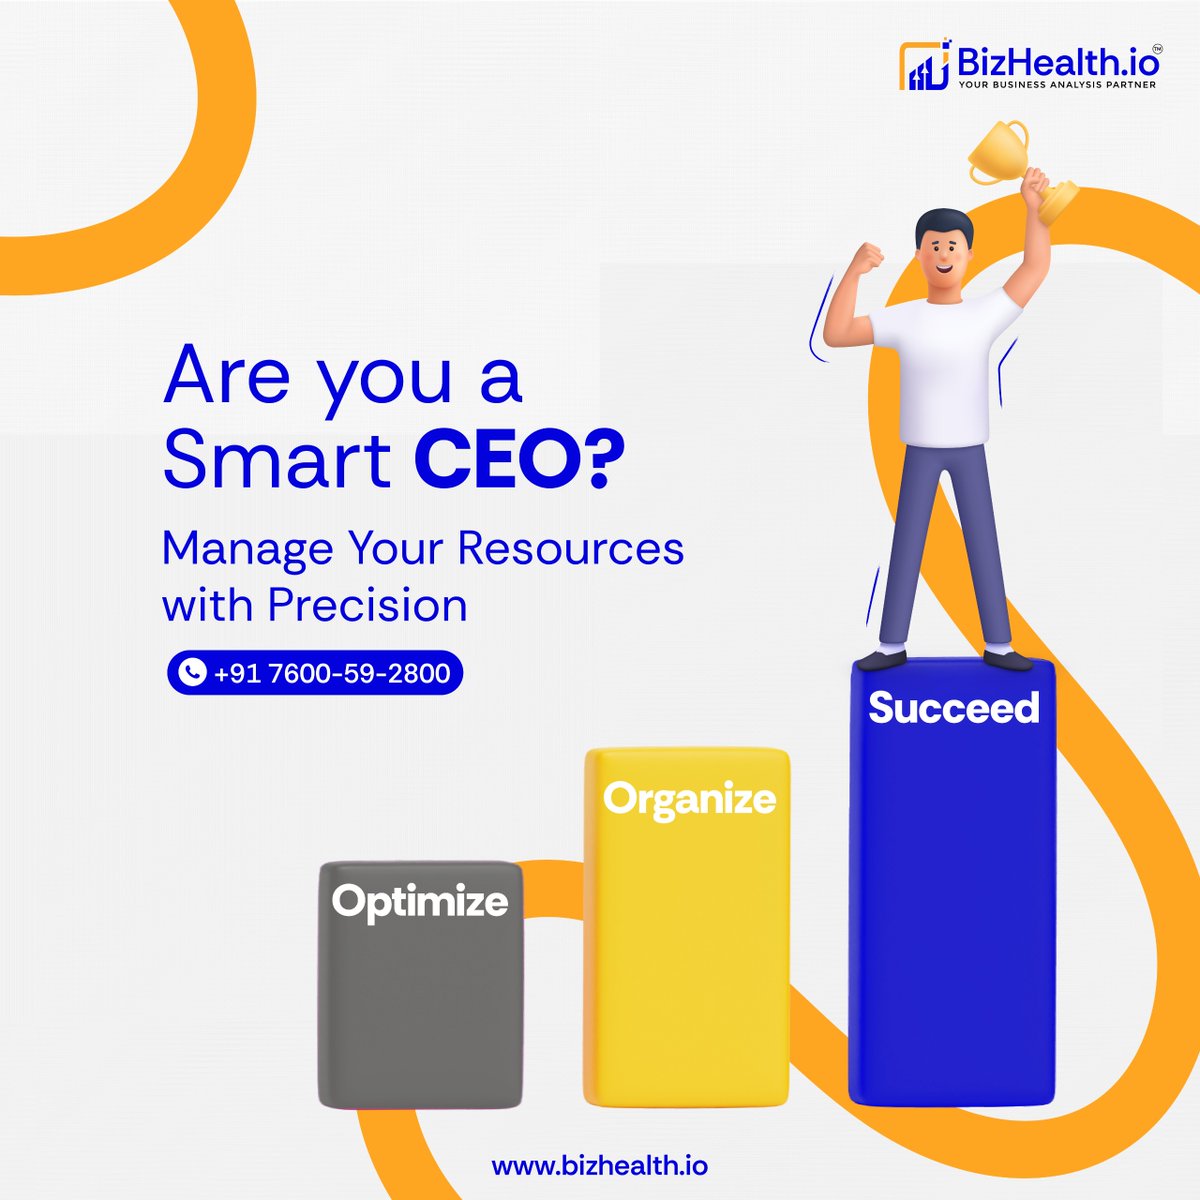 Be the Smart CEO your company needs. Streamline operations, boost productivity, and drive success with our strategic approach.

Contact us: +91 7600-59-2800 

 Visit: bizhealth.io  

#bigdata #datascience #dataanalysts #skills #datavisualisation #datacenter #powerbi